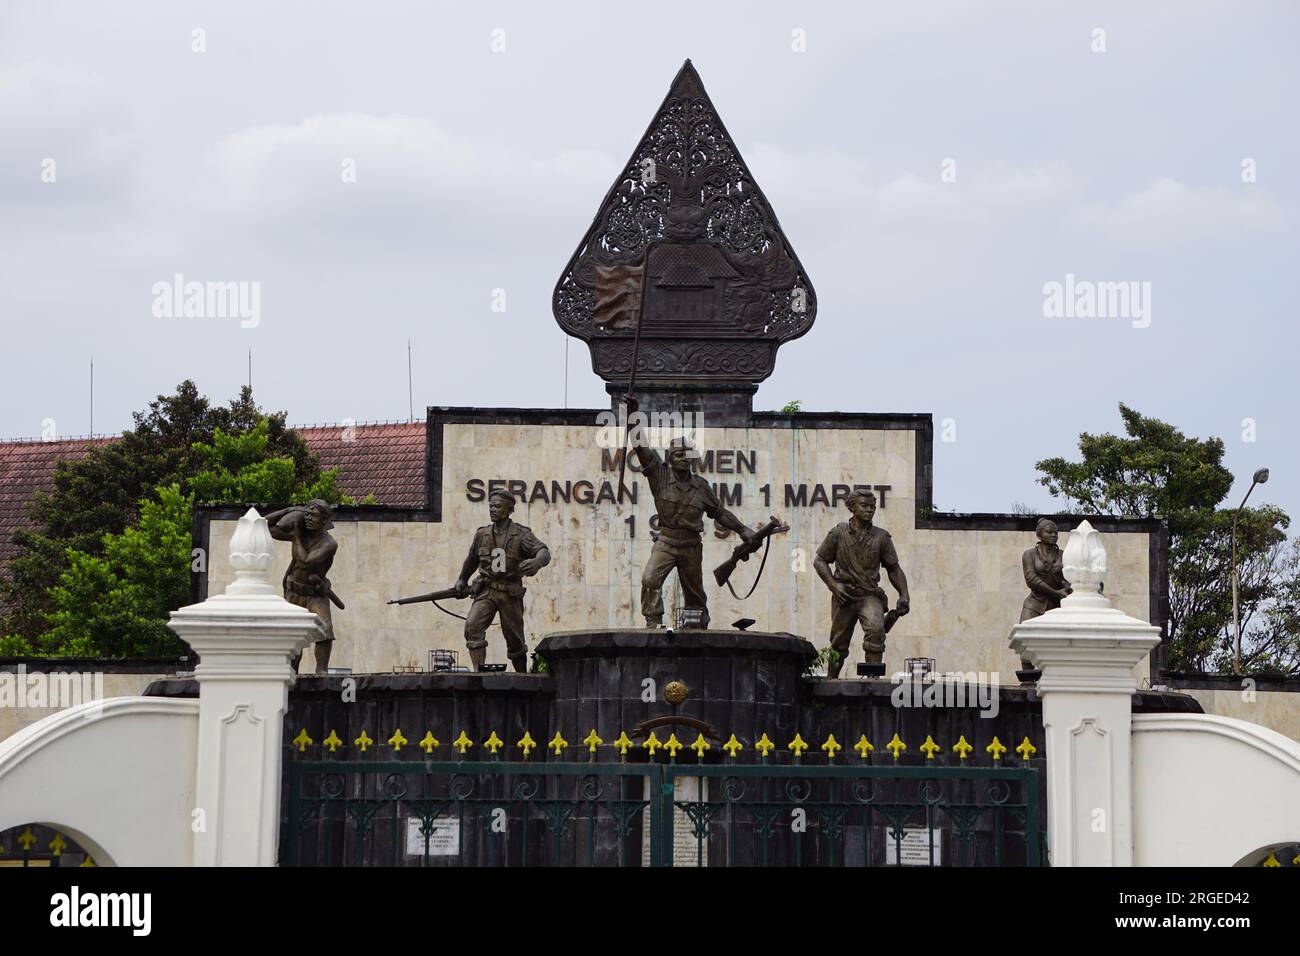 The monument of Serangan Umum 1 Maret 1949 in Jogja. This monument commemorates the 2nd Dutch Military Aggression in Indonesia Stock Photo